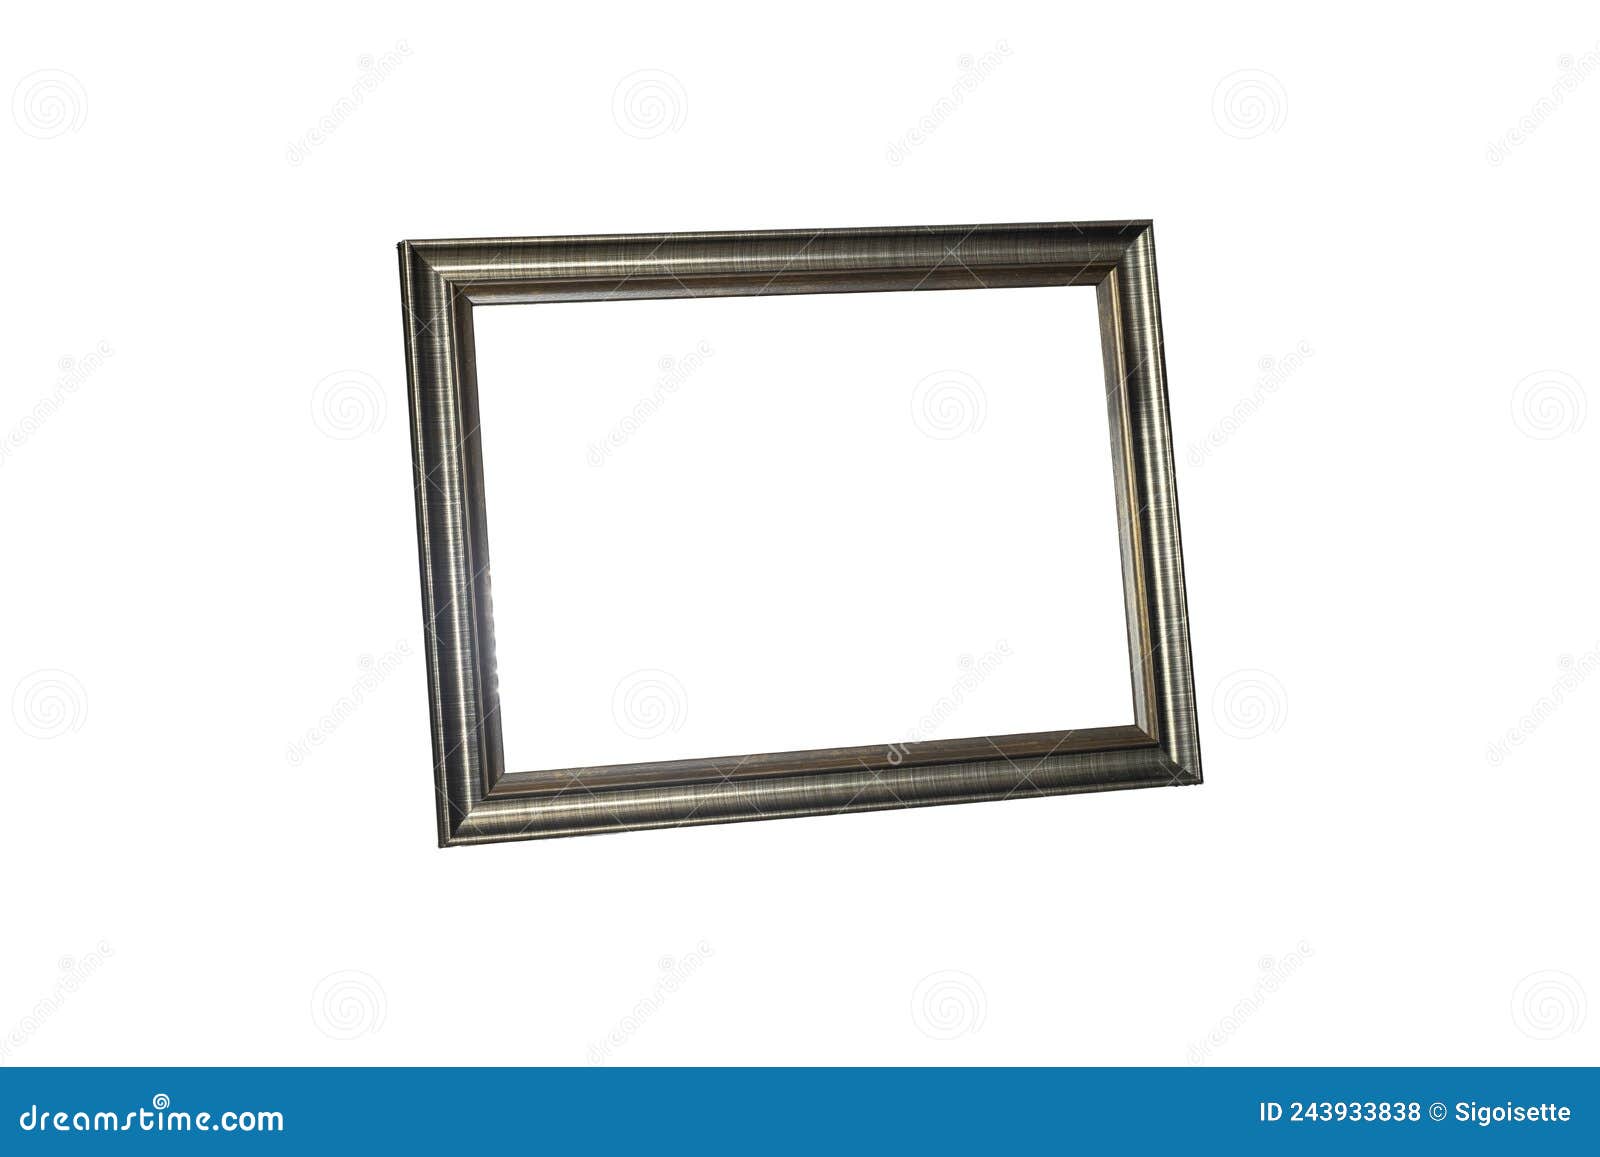 empty wooden ornate picture frame photo  on white background